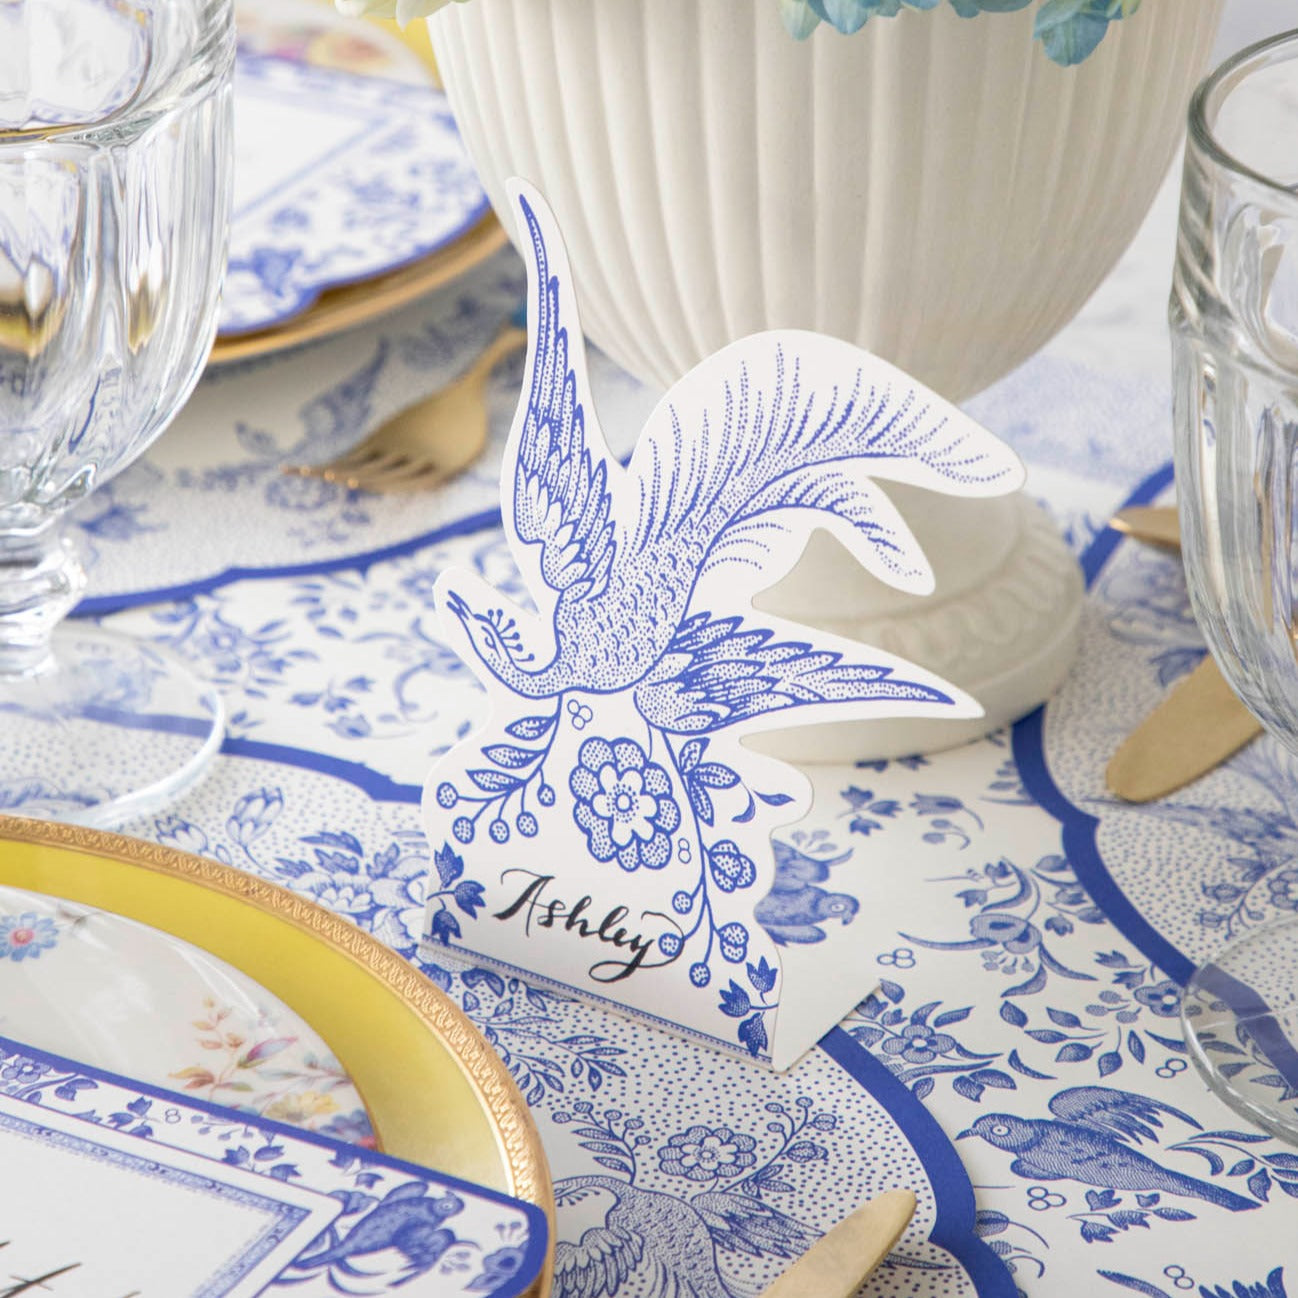 A Hester &amp; Cook Blue Asiatic Pheasants Place Card collaboration table setting with place cards.